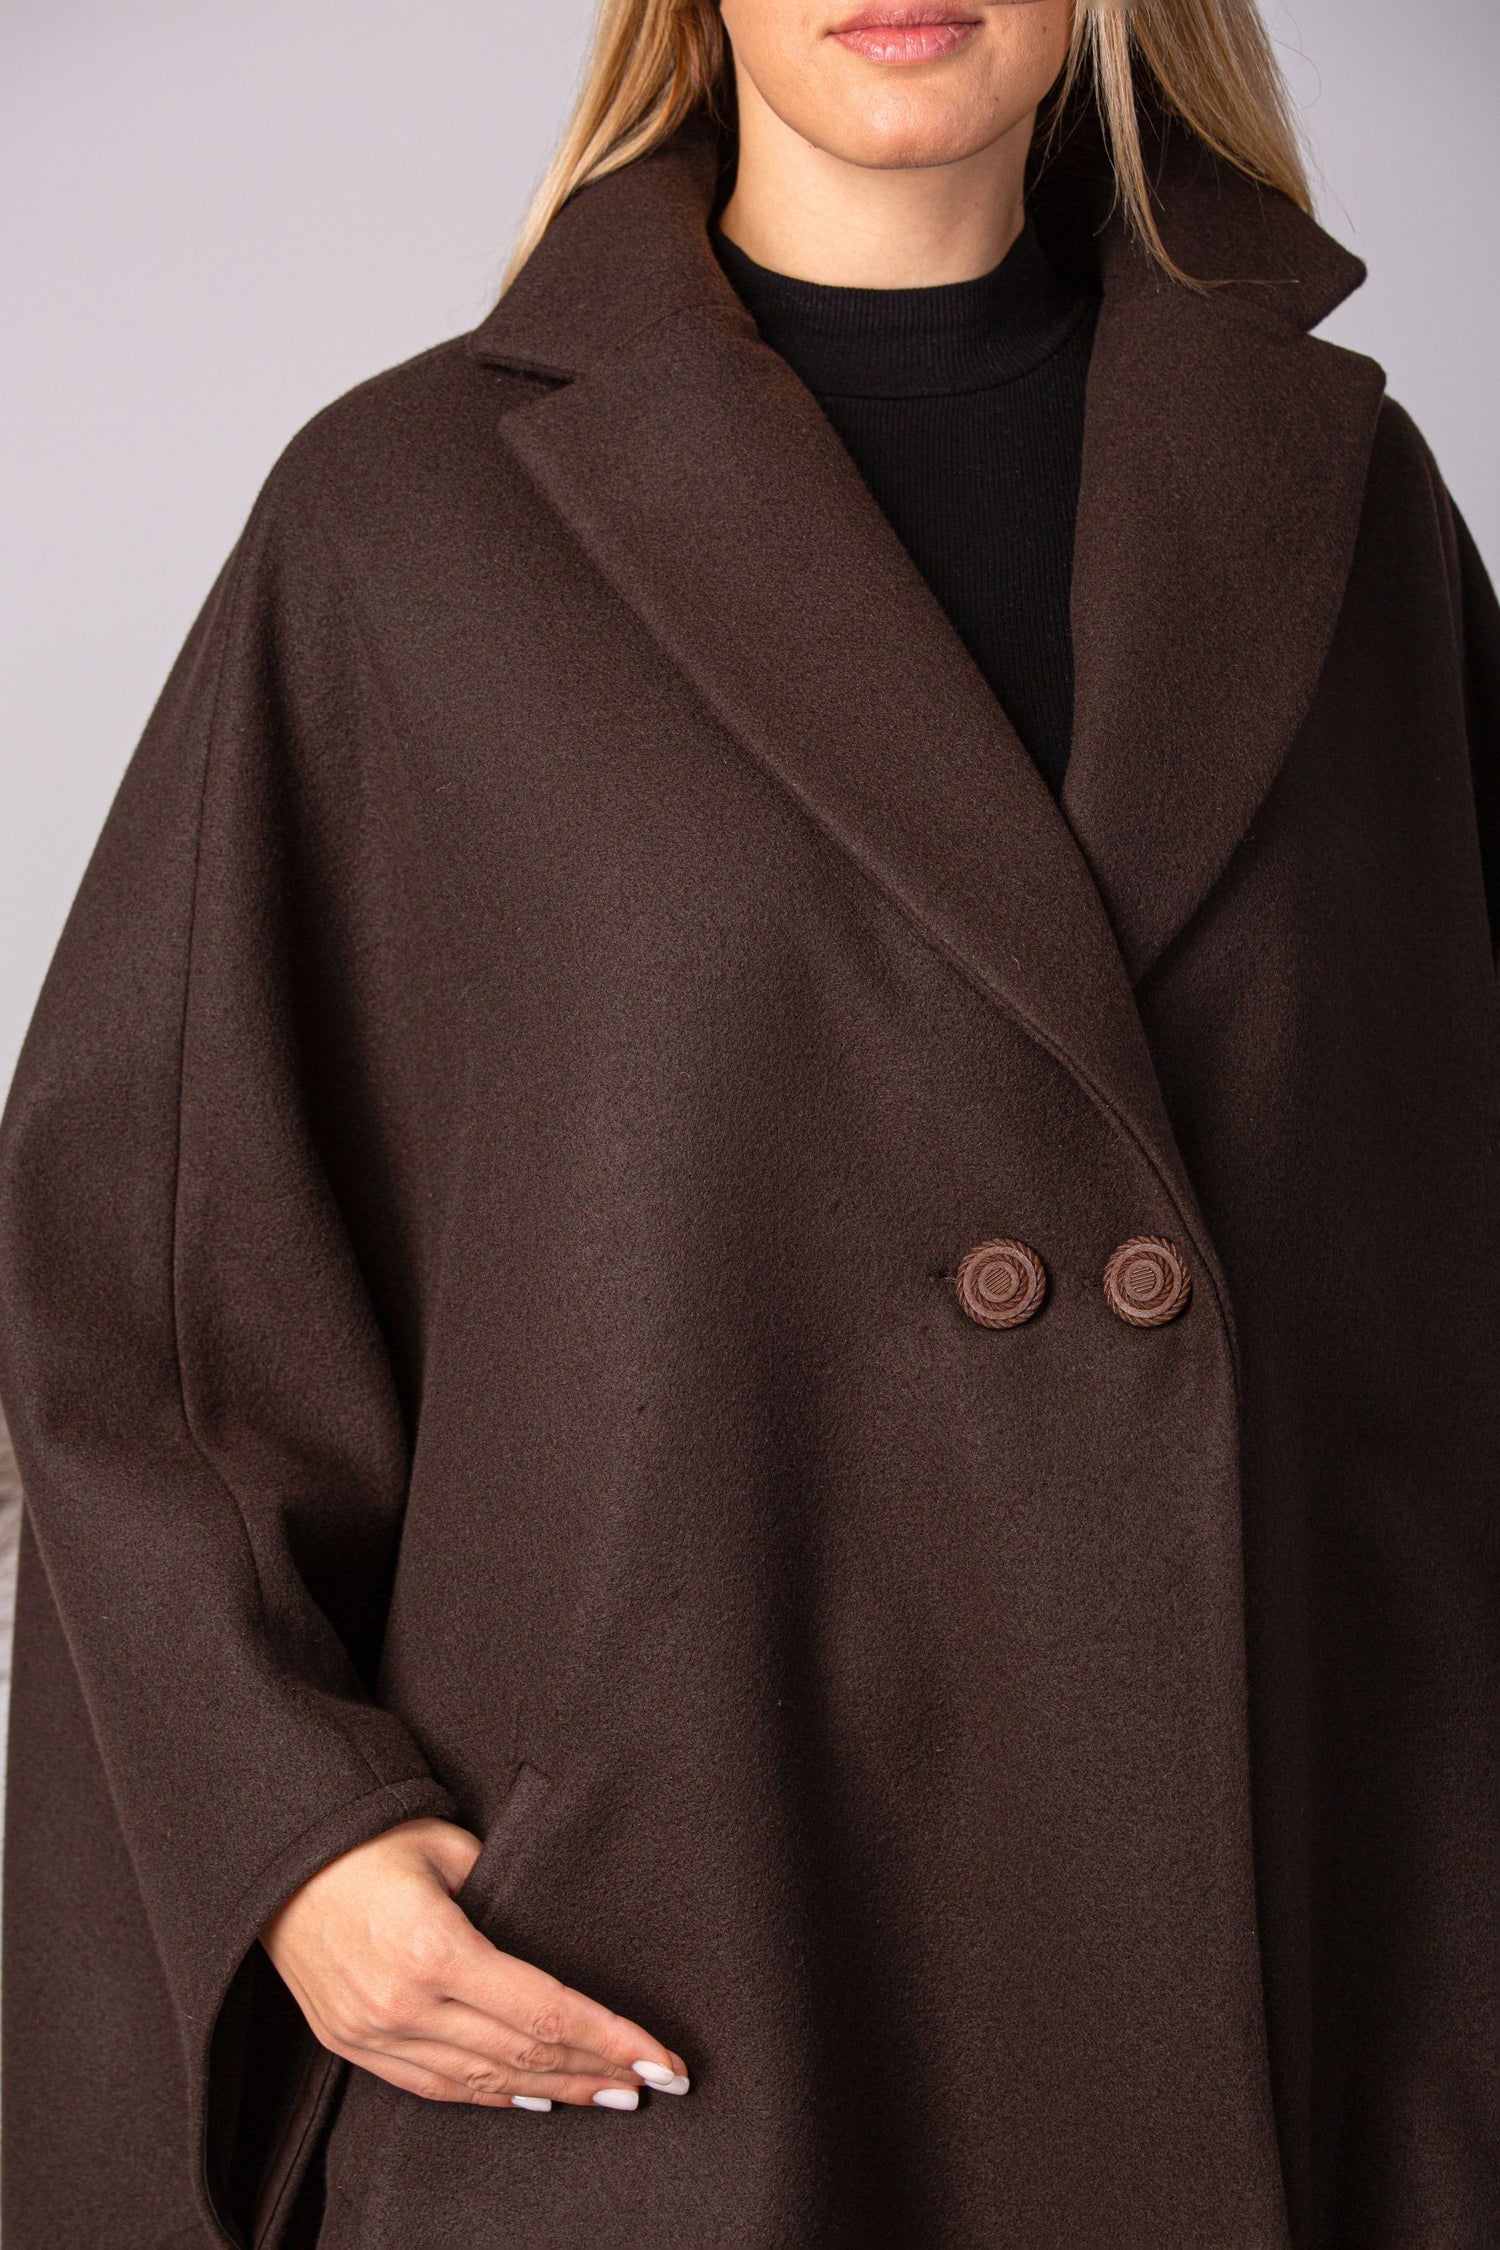 Relaxed drop shoulder pattern of Brown Collared Loose Cape Coat - from Nikka Place | Effortless fashion for easy living